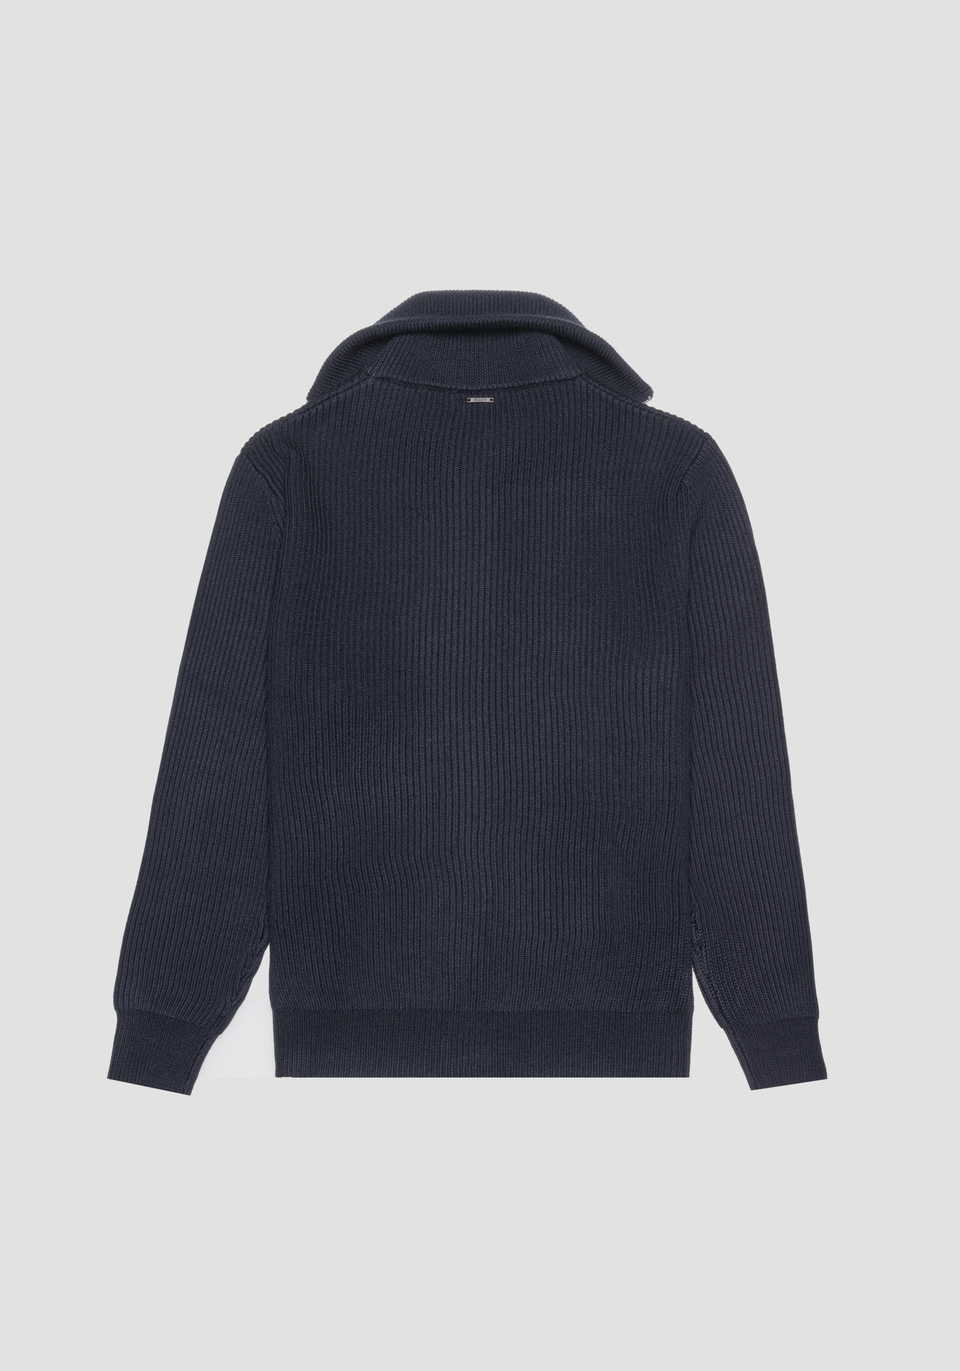 REGULAR FIT SWEATSHIRT WITH ZIP IN WOOL BLEND YARN WITH ALL-OVER ENGLISH RIB - Antony Morato Online Shop